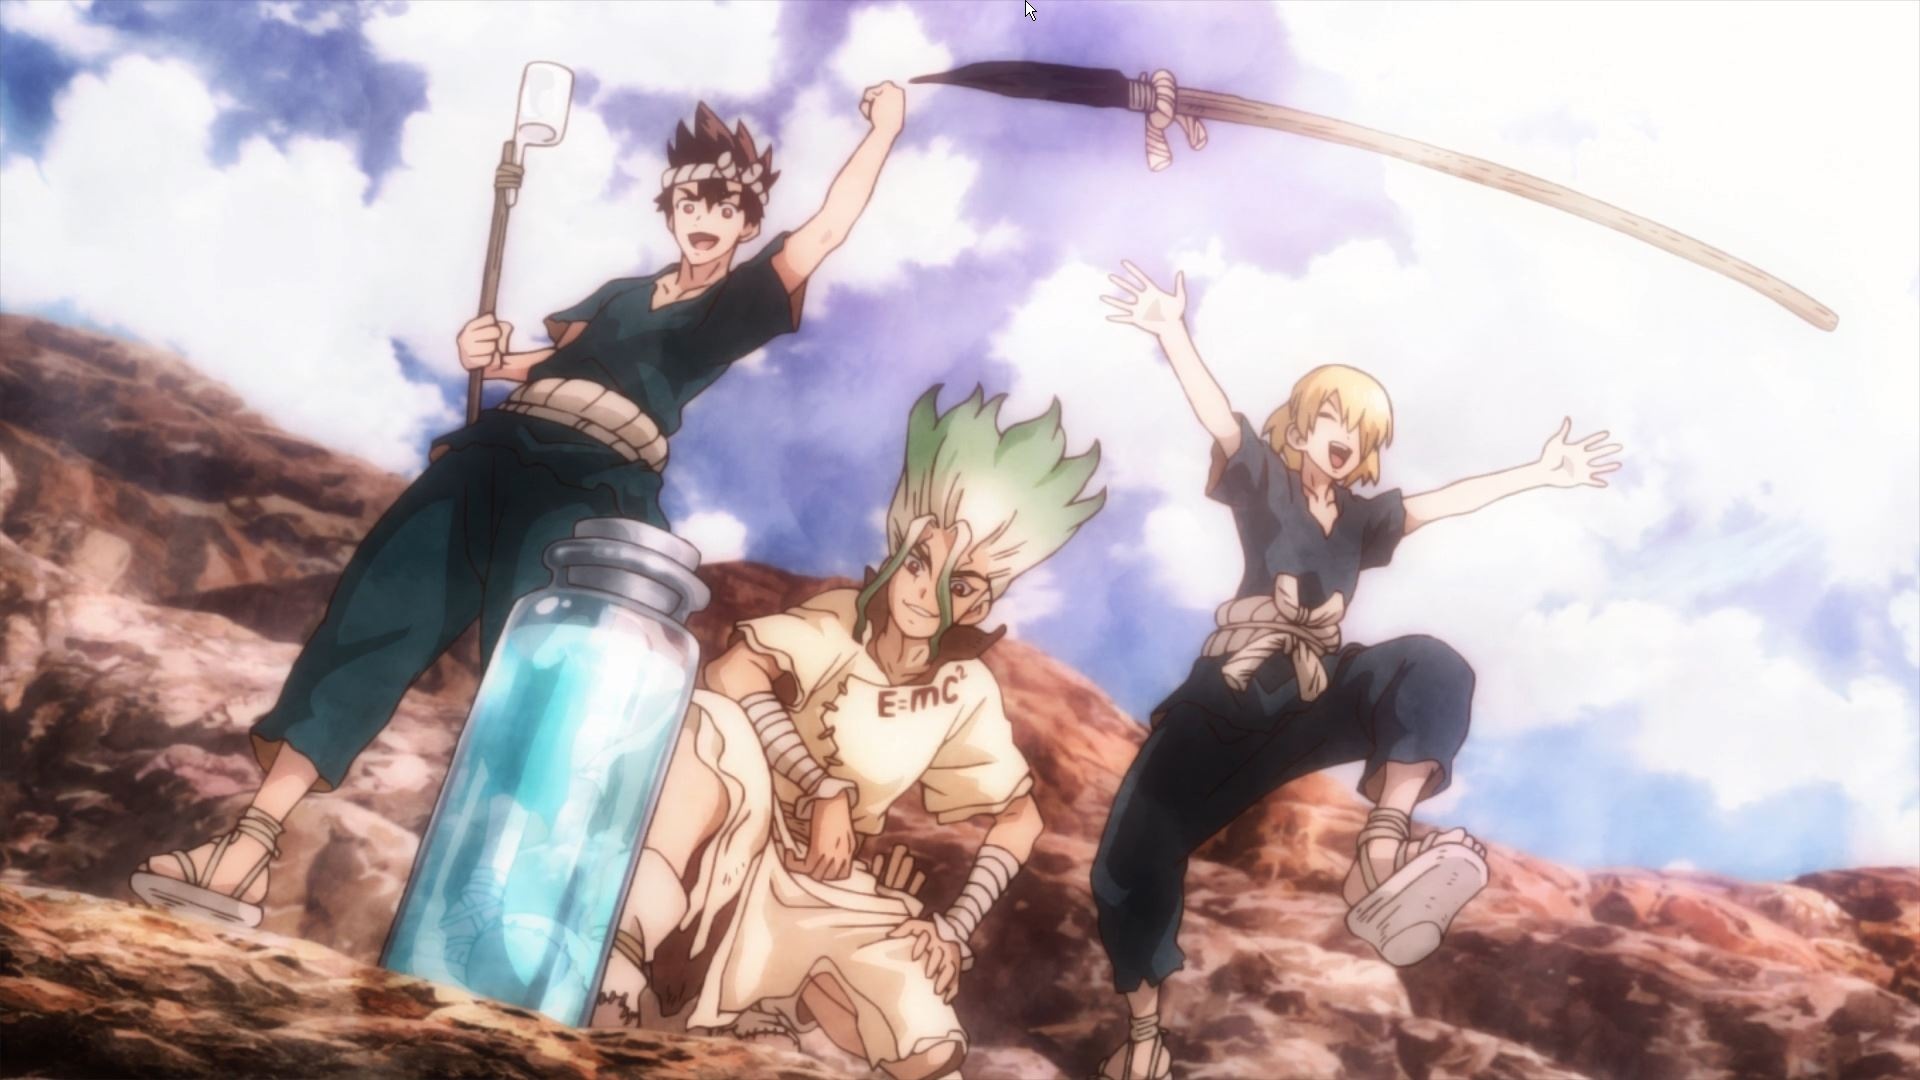 Dr.stone ep 12 screen 4